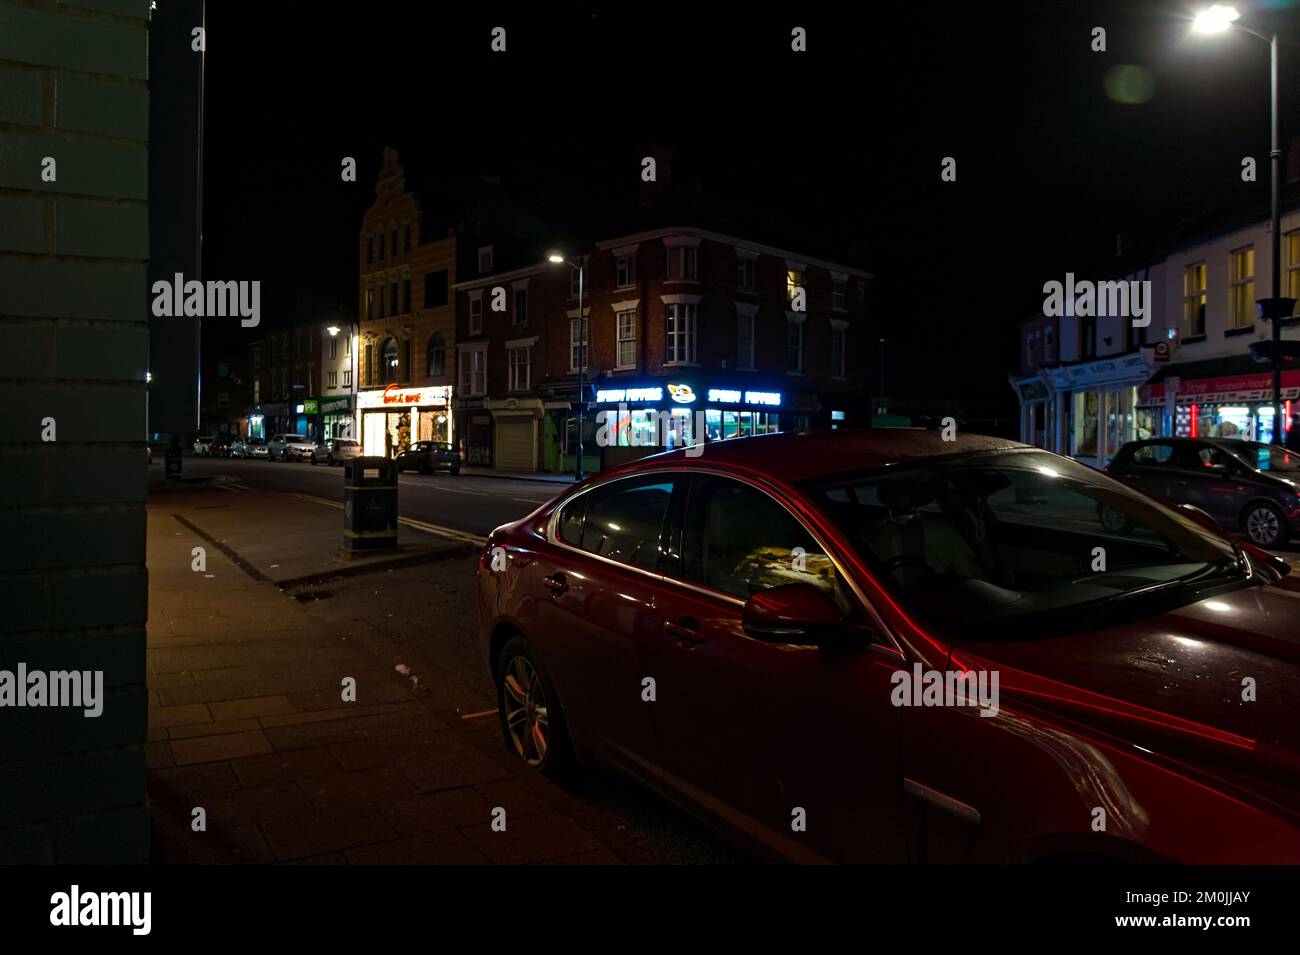 West Street at night with modern Jaguar car parked in the foreground Stock Photo